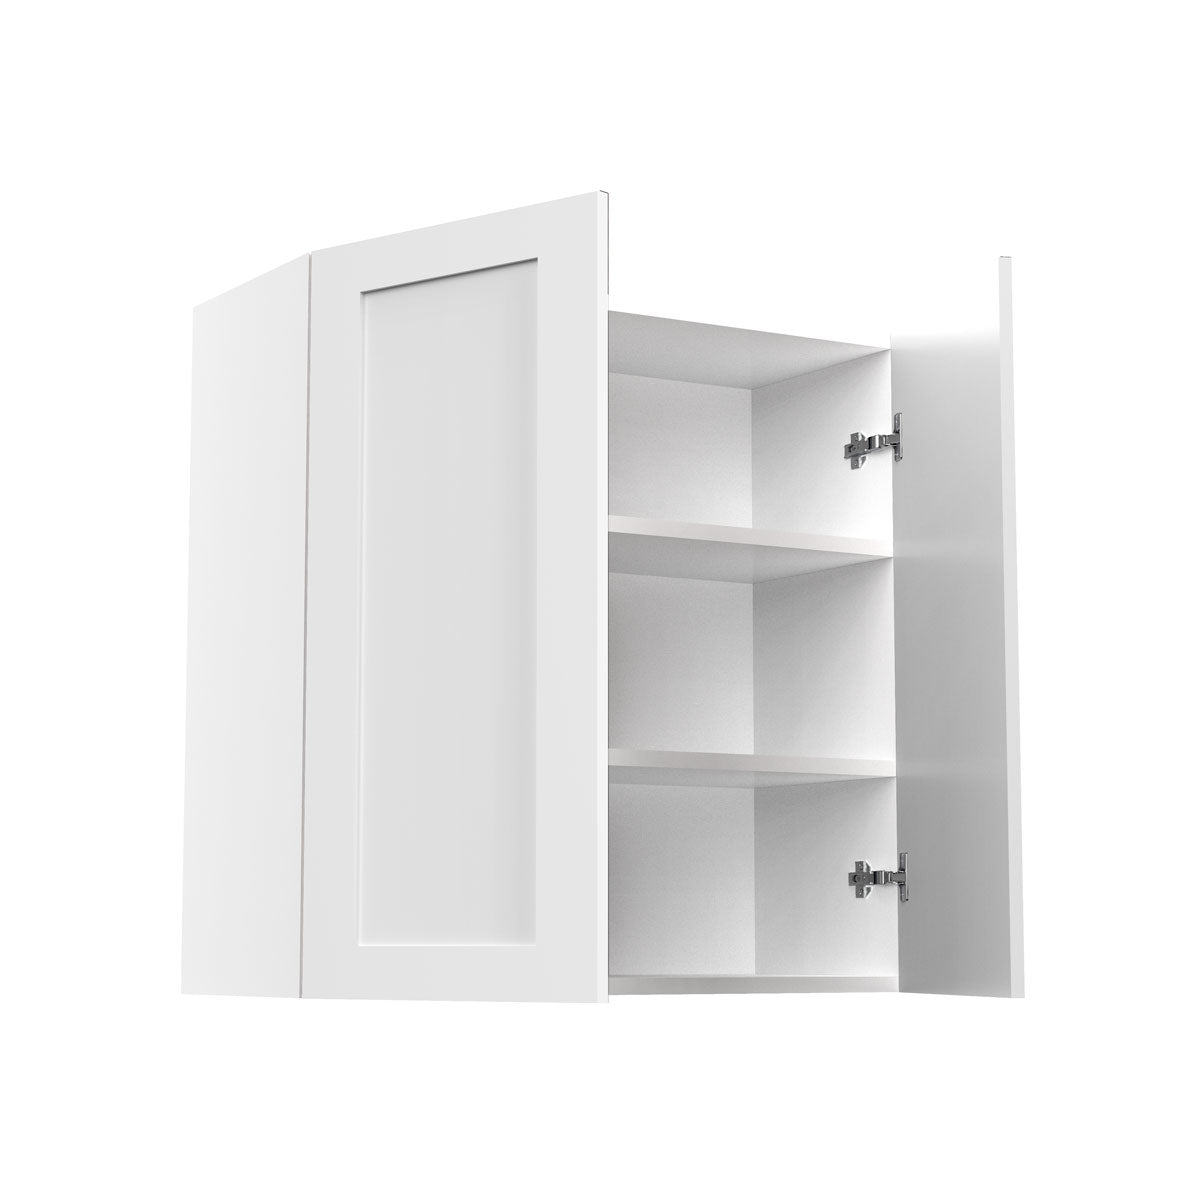 RTA - White Shaker - Double Door Wall Cabinets | 30"W x 30"H x 12"D